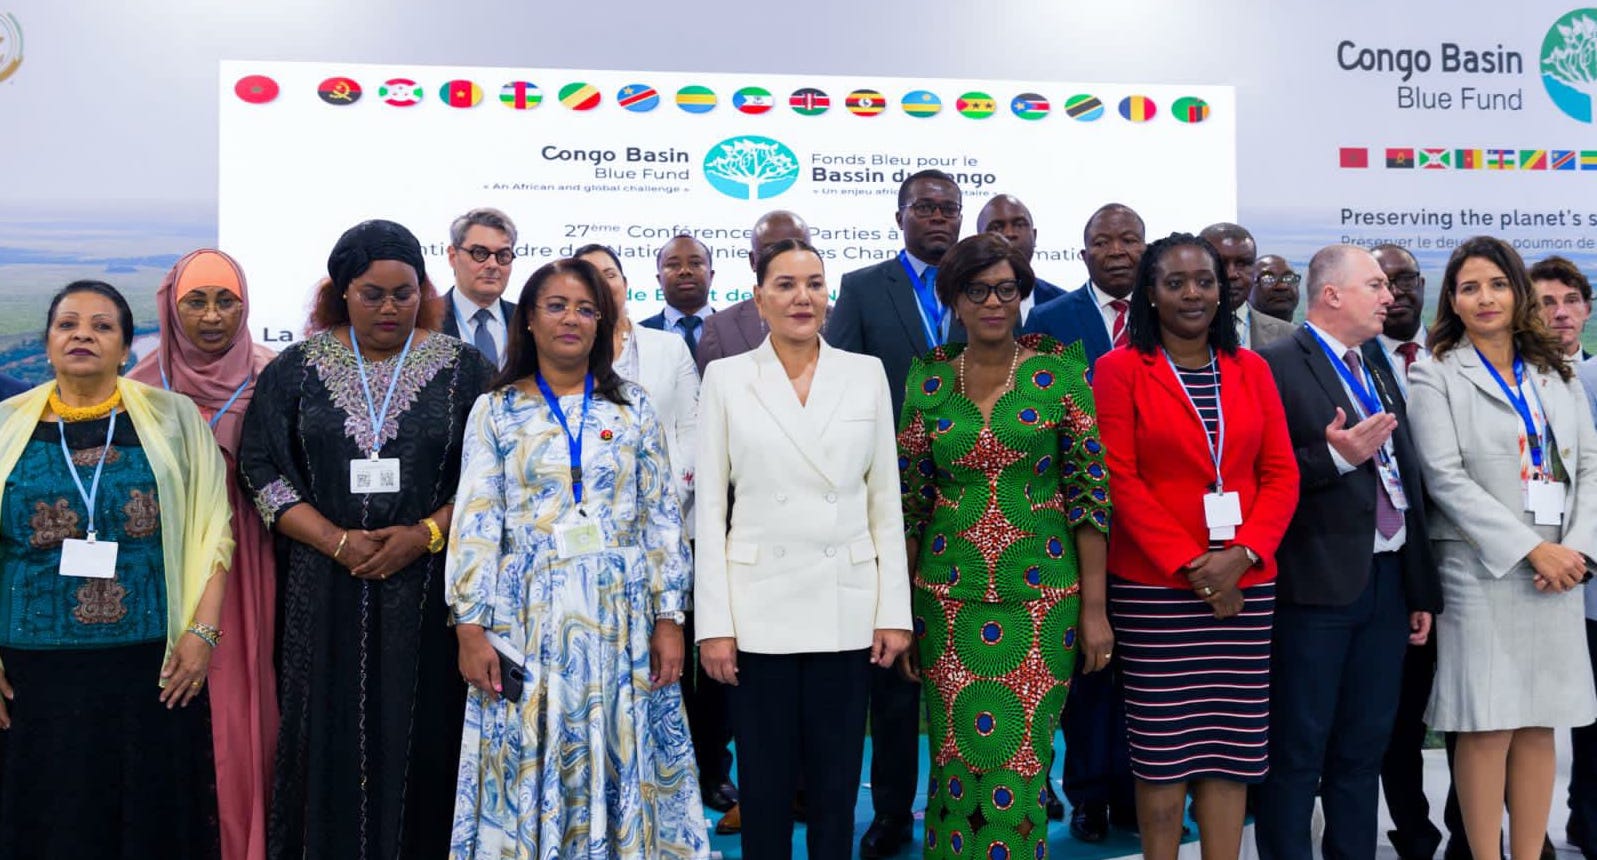 Sharm el-Sheikh – COP 27: HRH Princess Lalla Hasnaa Chairs High-level Side Event on Combating Climate Change in Congo Basin